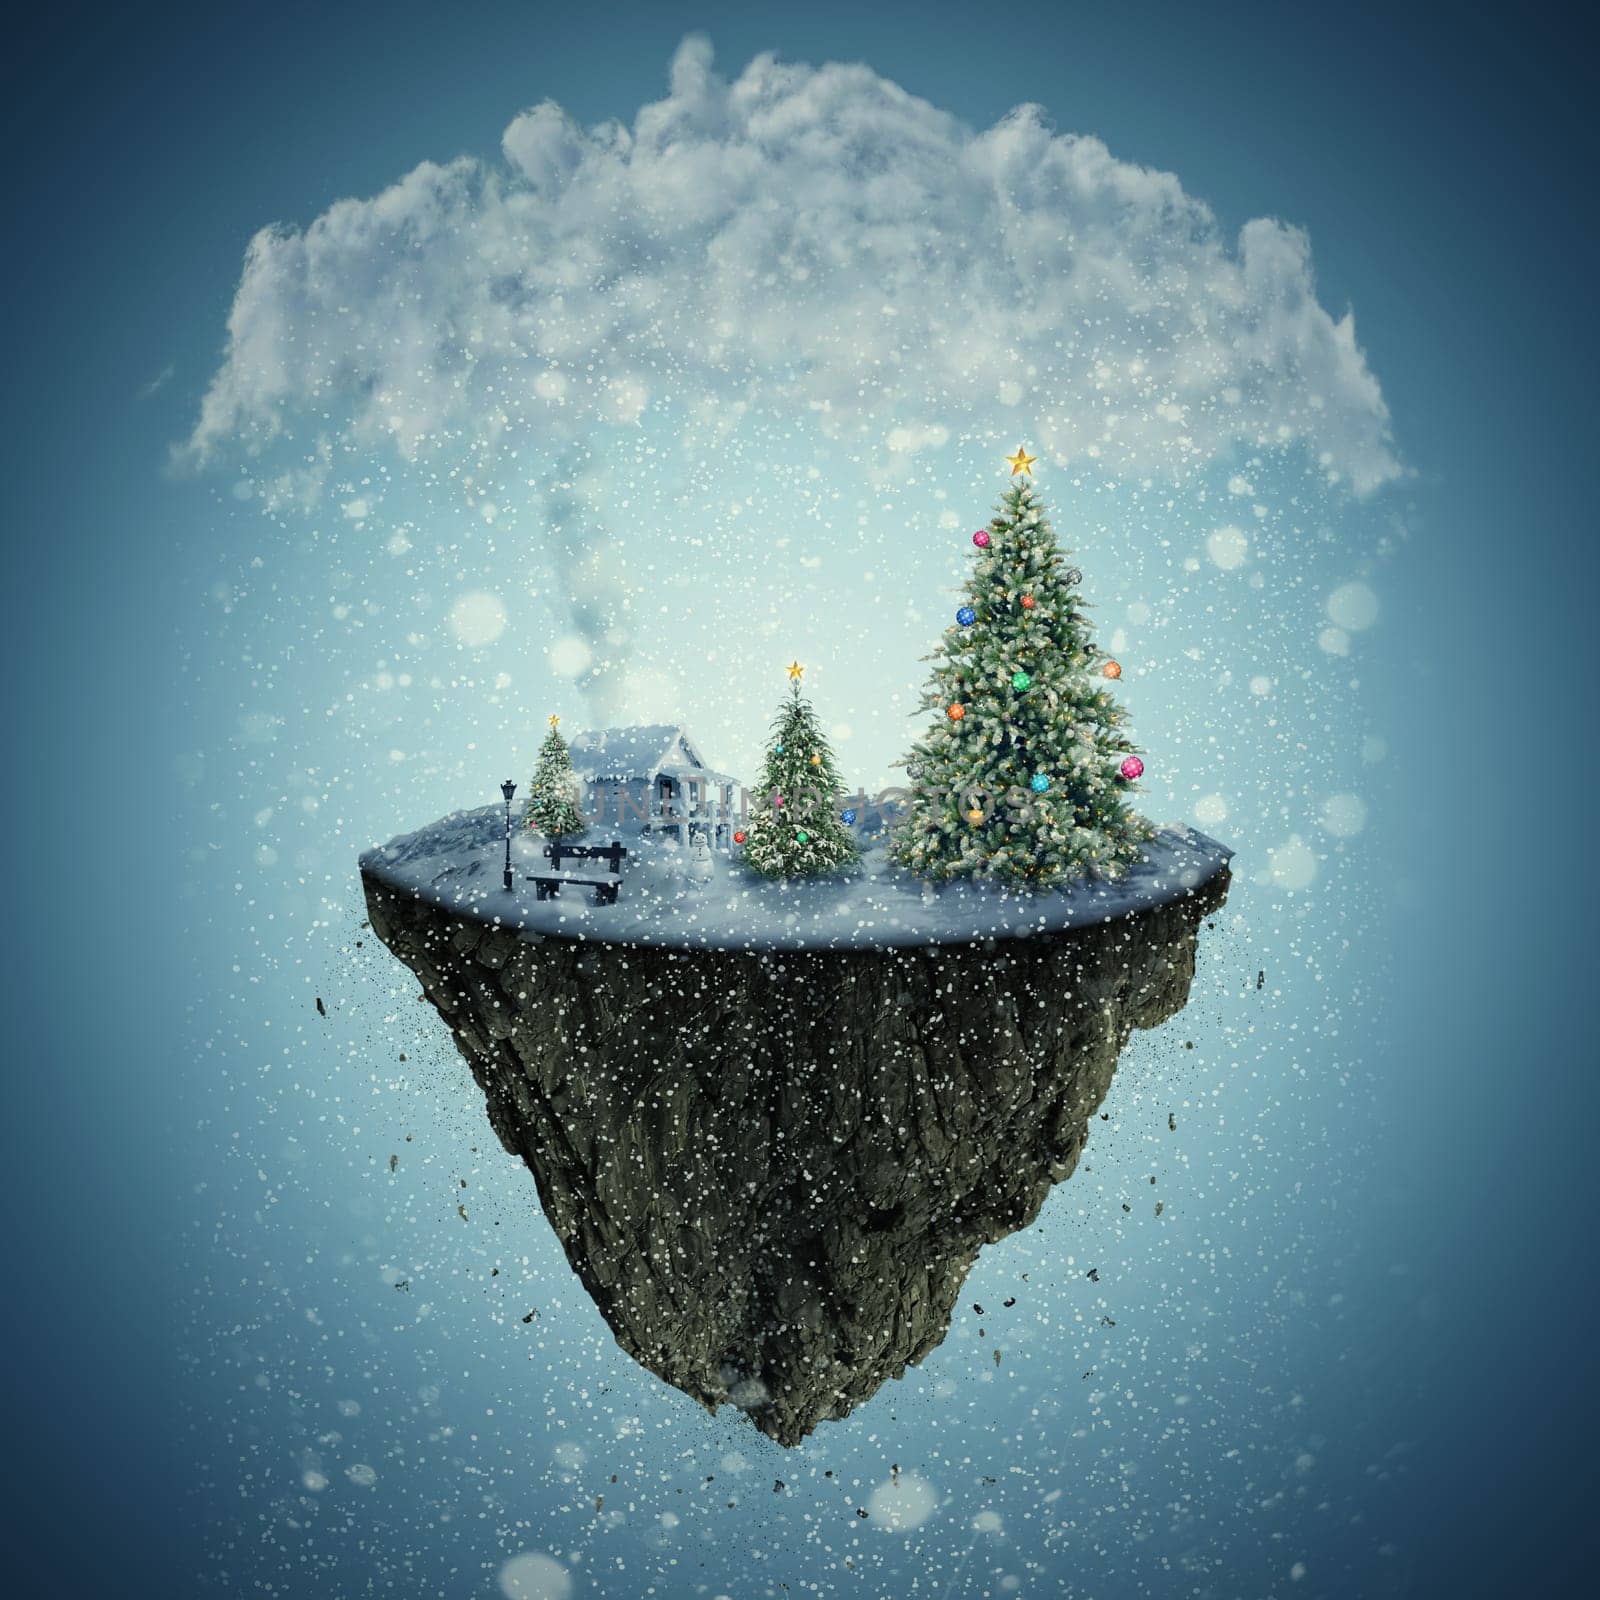 Winter holidays illustration of a isolated dreamland, as a flying island covered with snow. Santa's home, decorated Christmas trees and a bench on the edge.